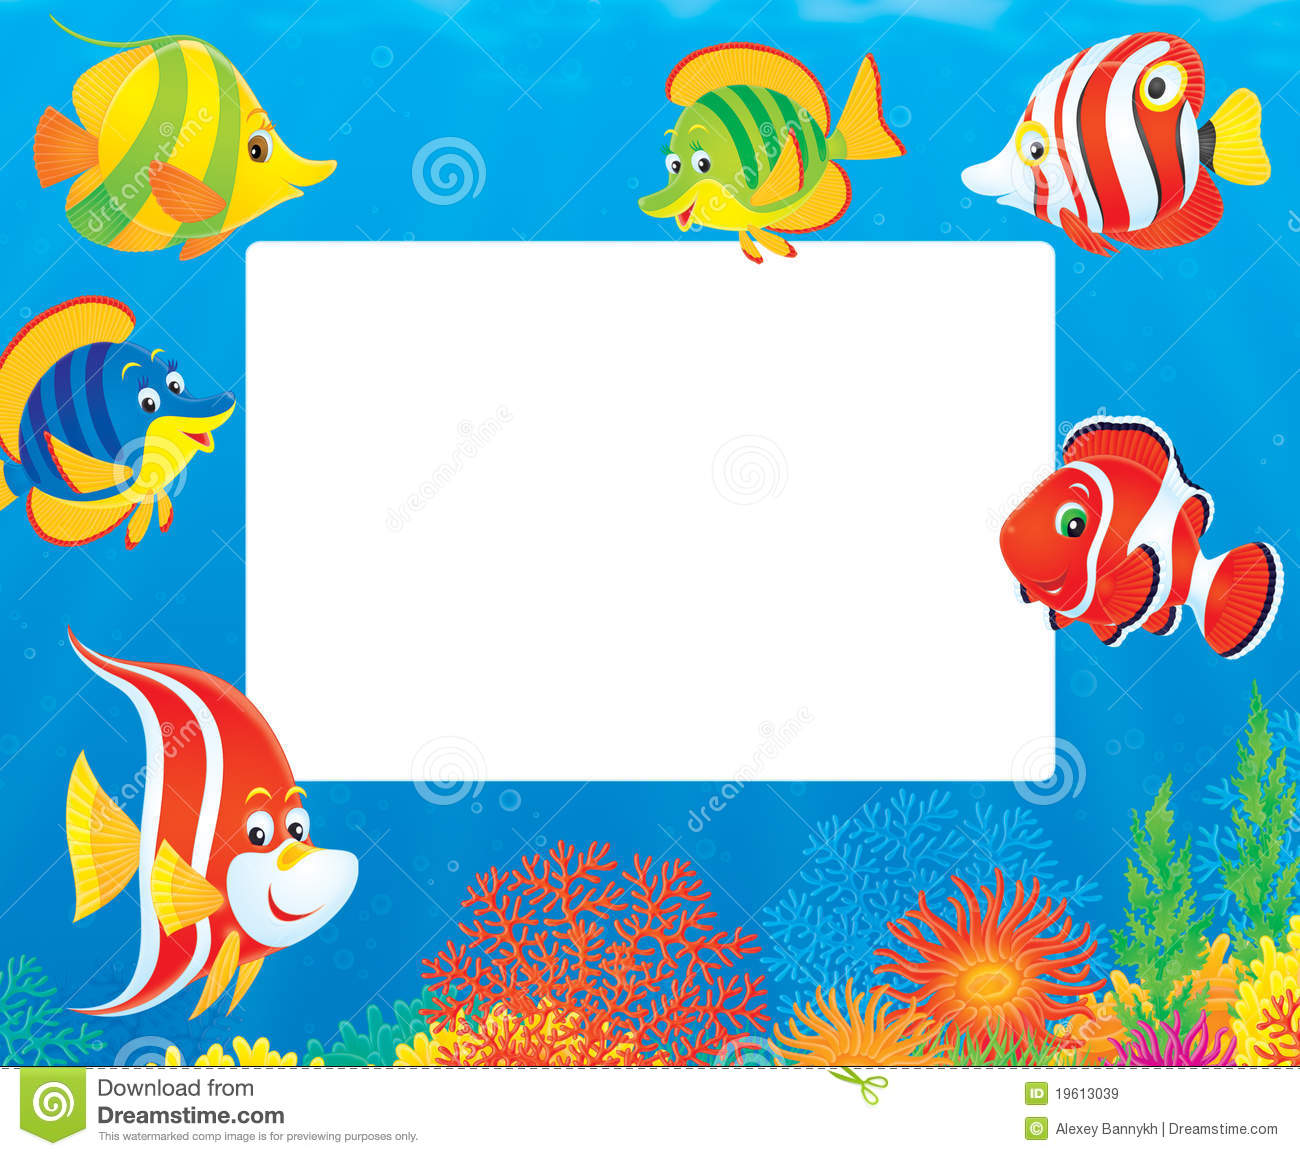 Border Of Tropical Fishes Royalty Free Stock Images   Image  19613039